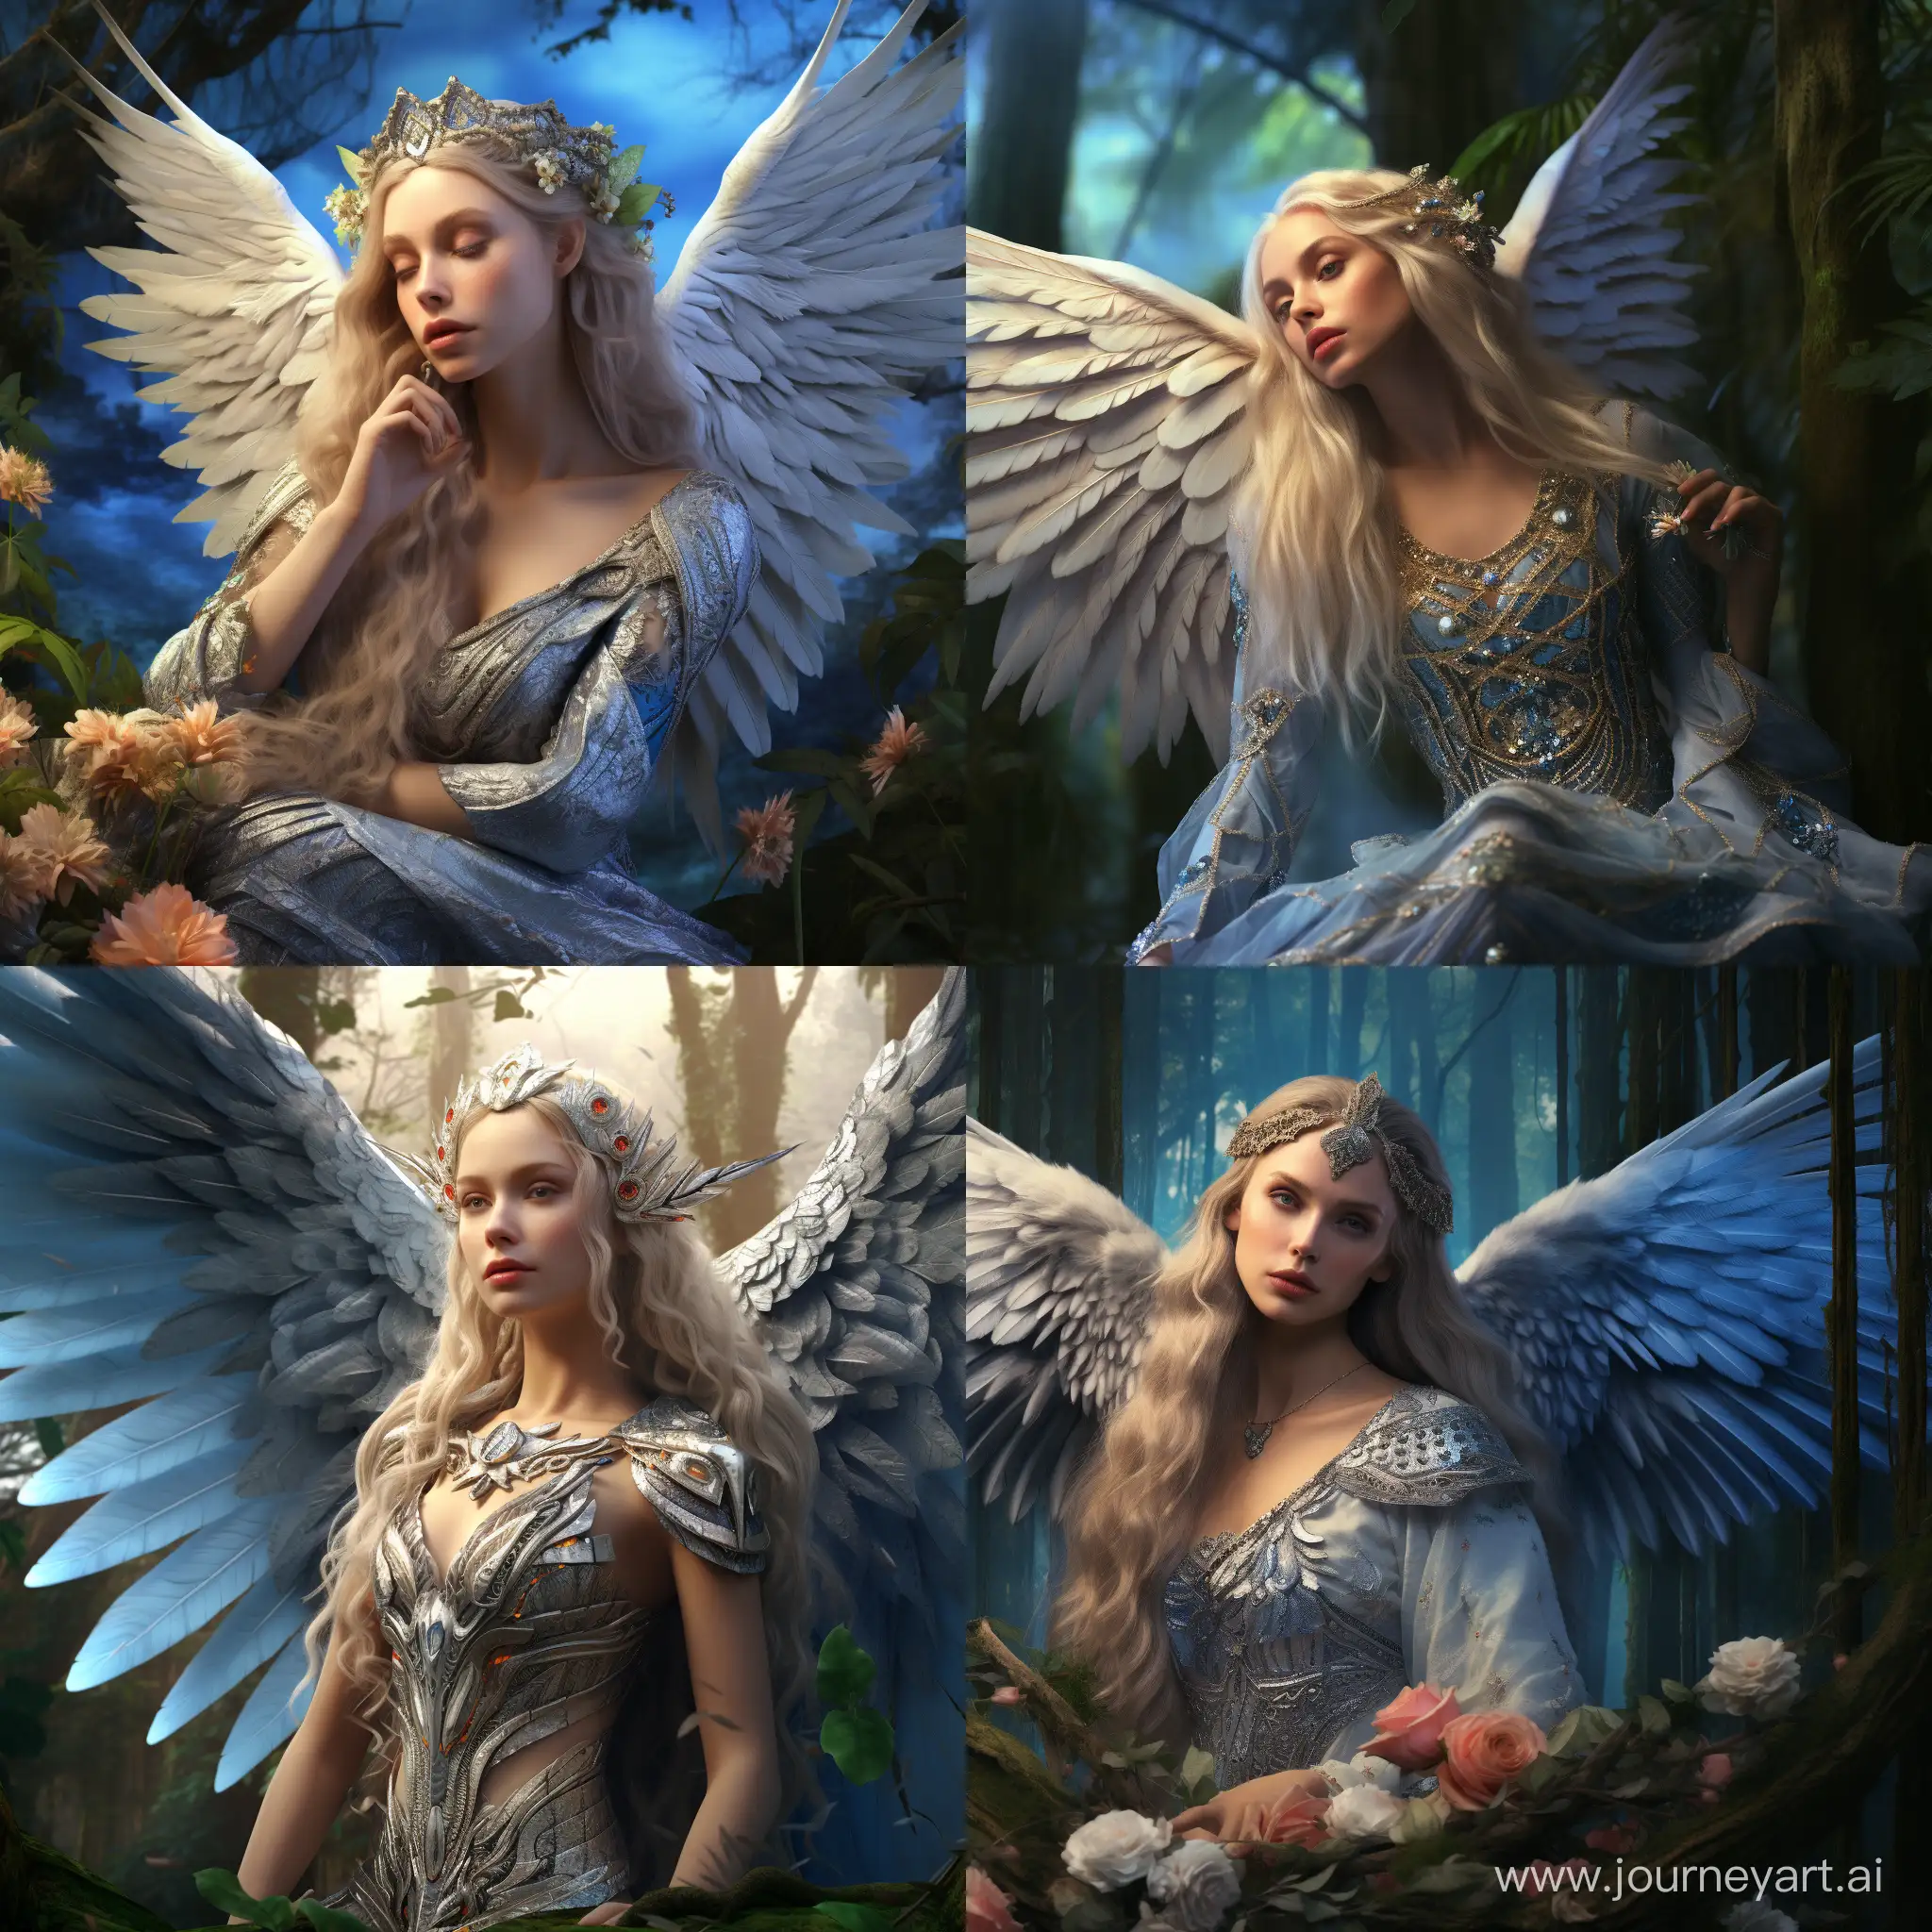 Archangel of life, mother nature - a woman with long silver hair and blue shining eyes, with large white wings with glowing bright blue markings,

Kisses a rosebud (the bud is filled with blue energy)
against the backdrop of a mystical evergreen forest, animals and elves are visible in the distance

Fantasy style, high detail, 8k